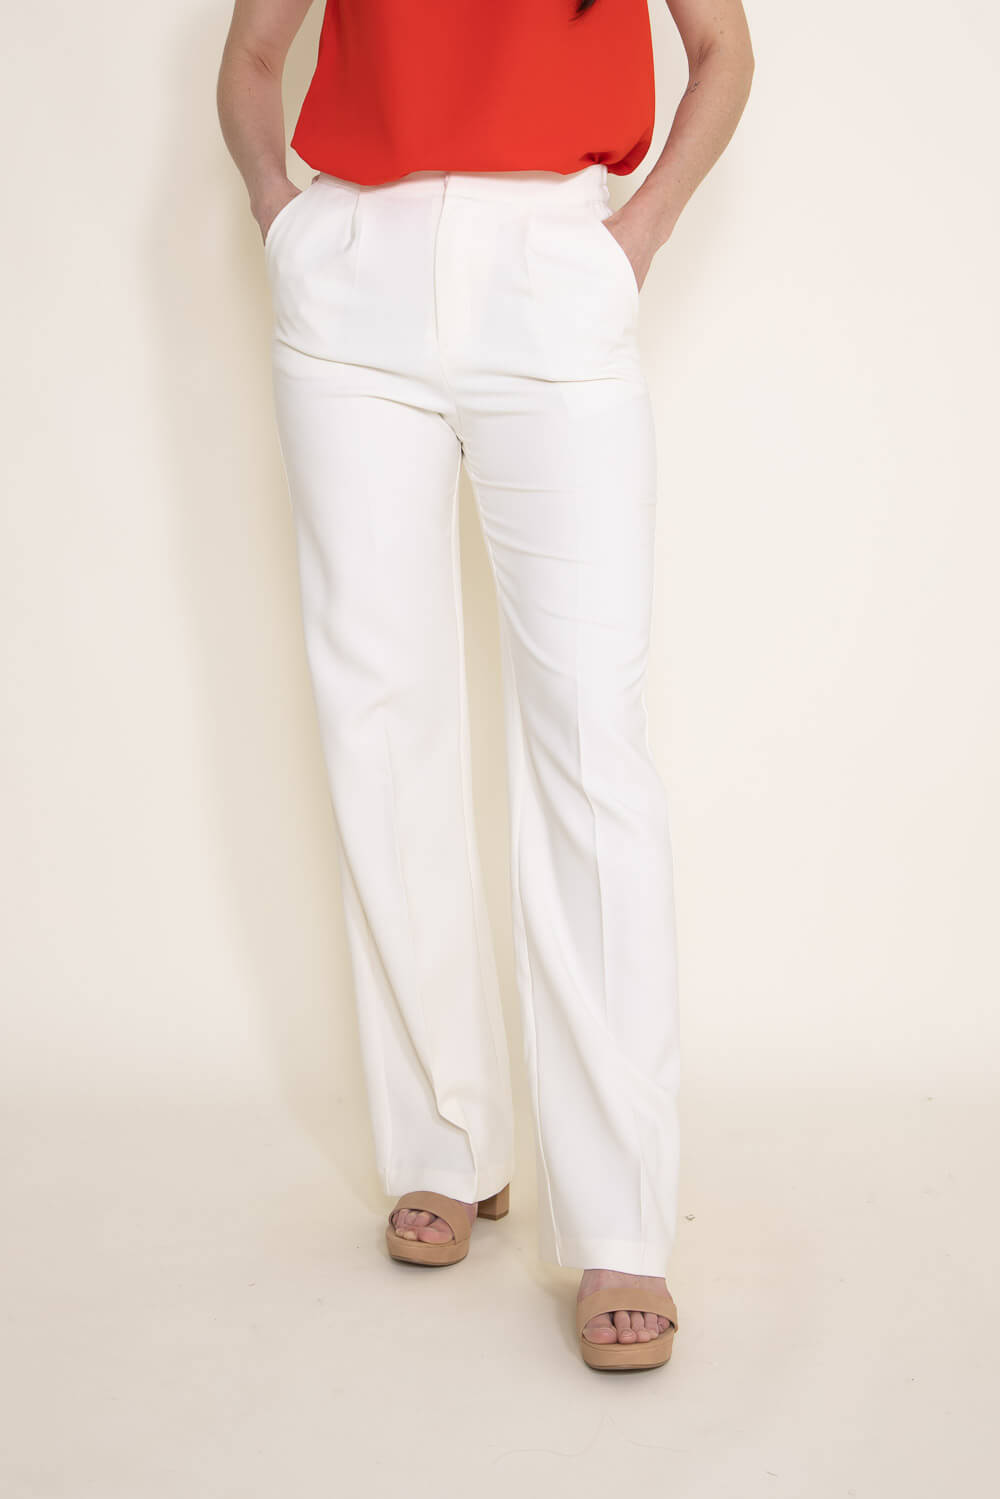 Buy Ivory Trousers & Pants for Men by Oxolloxo Online | Ajio.com